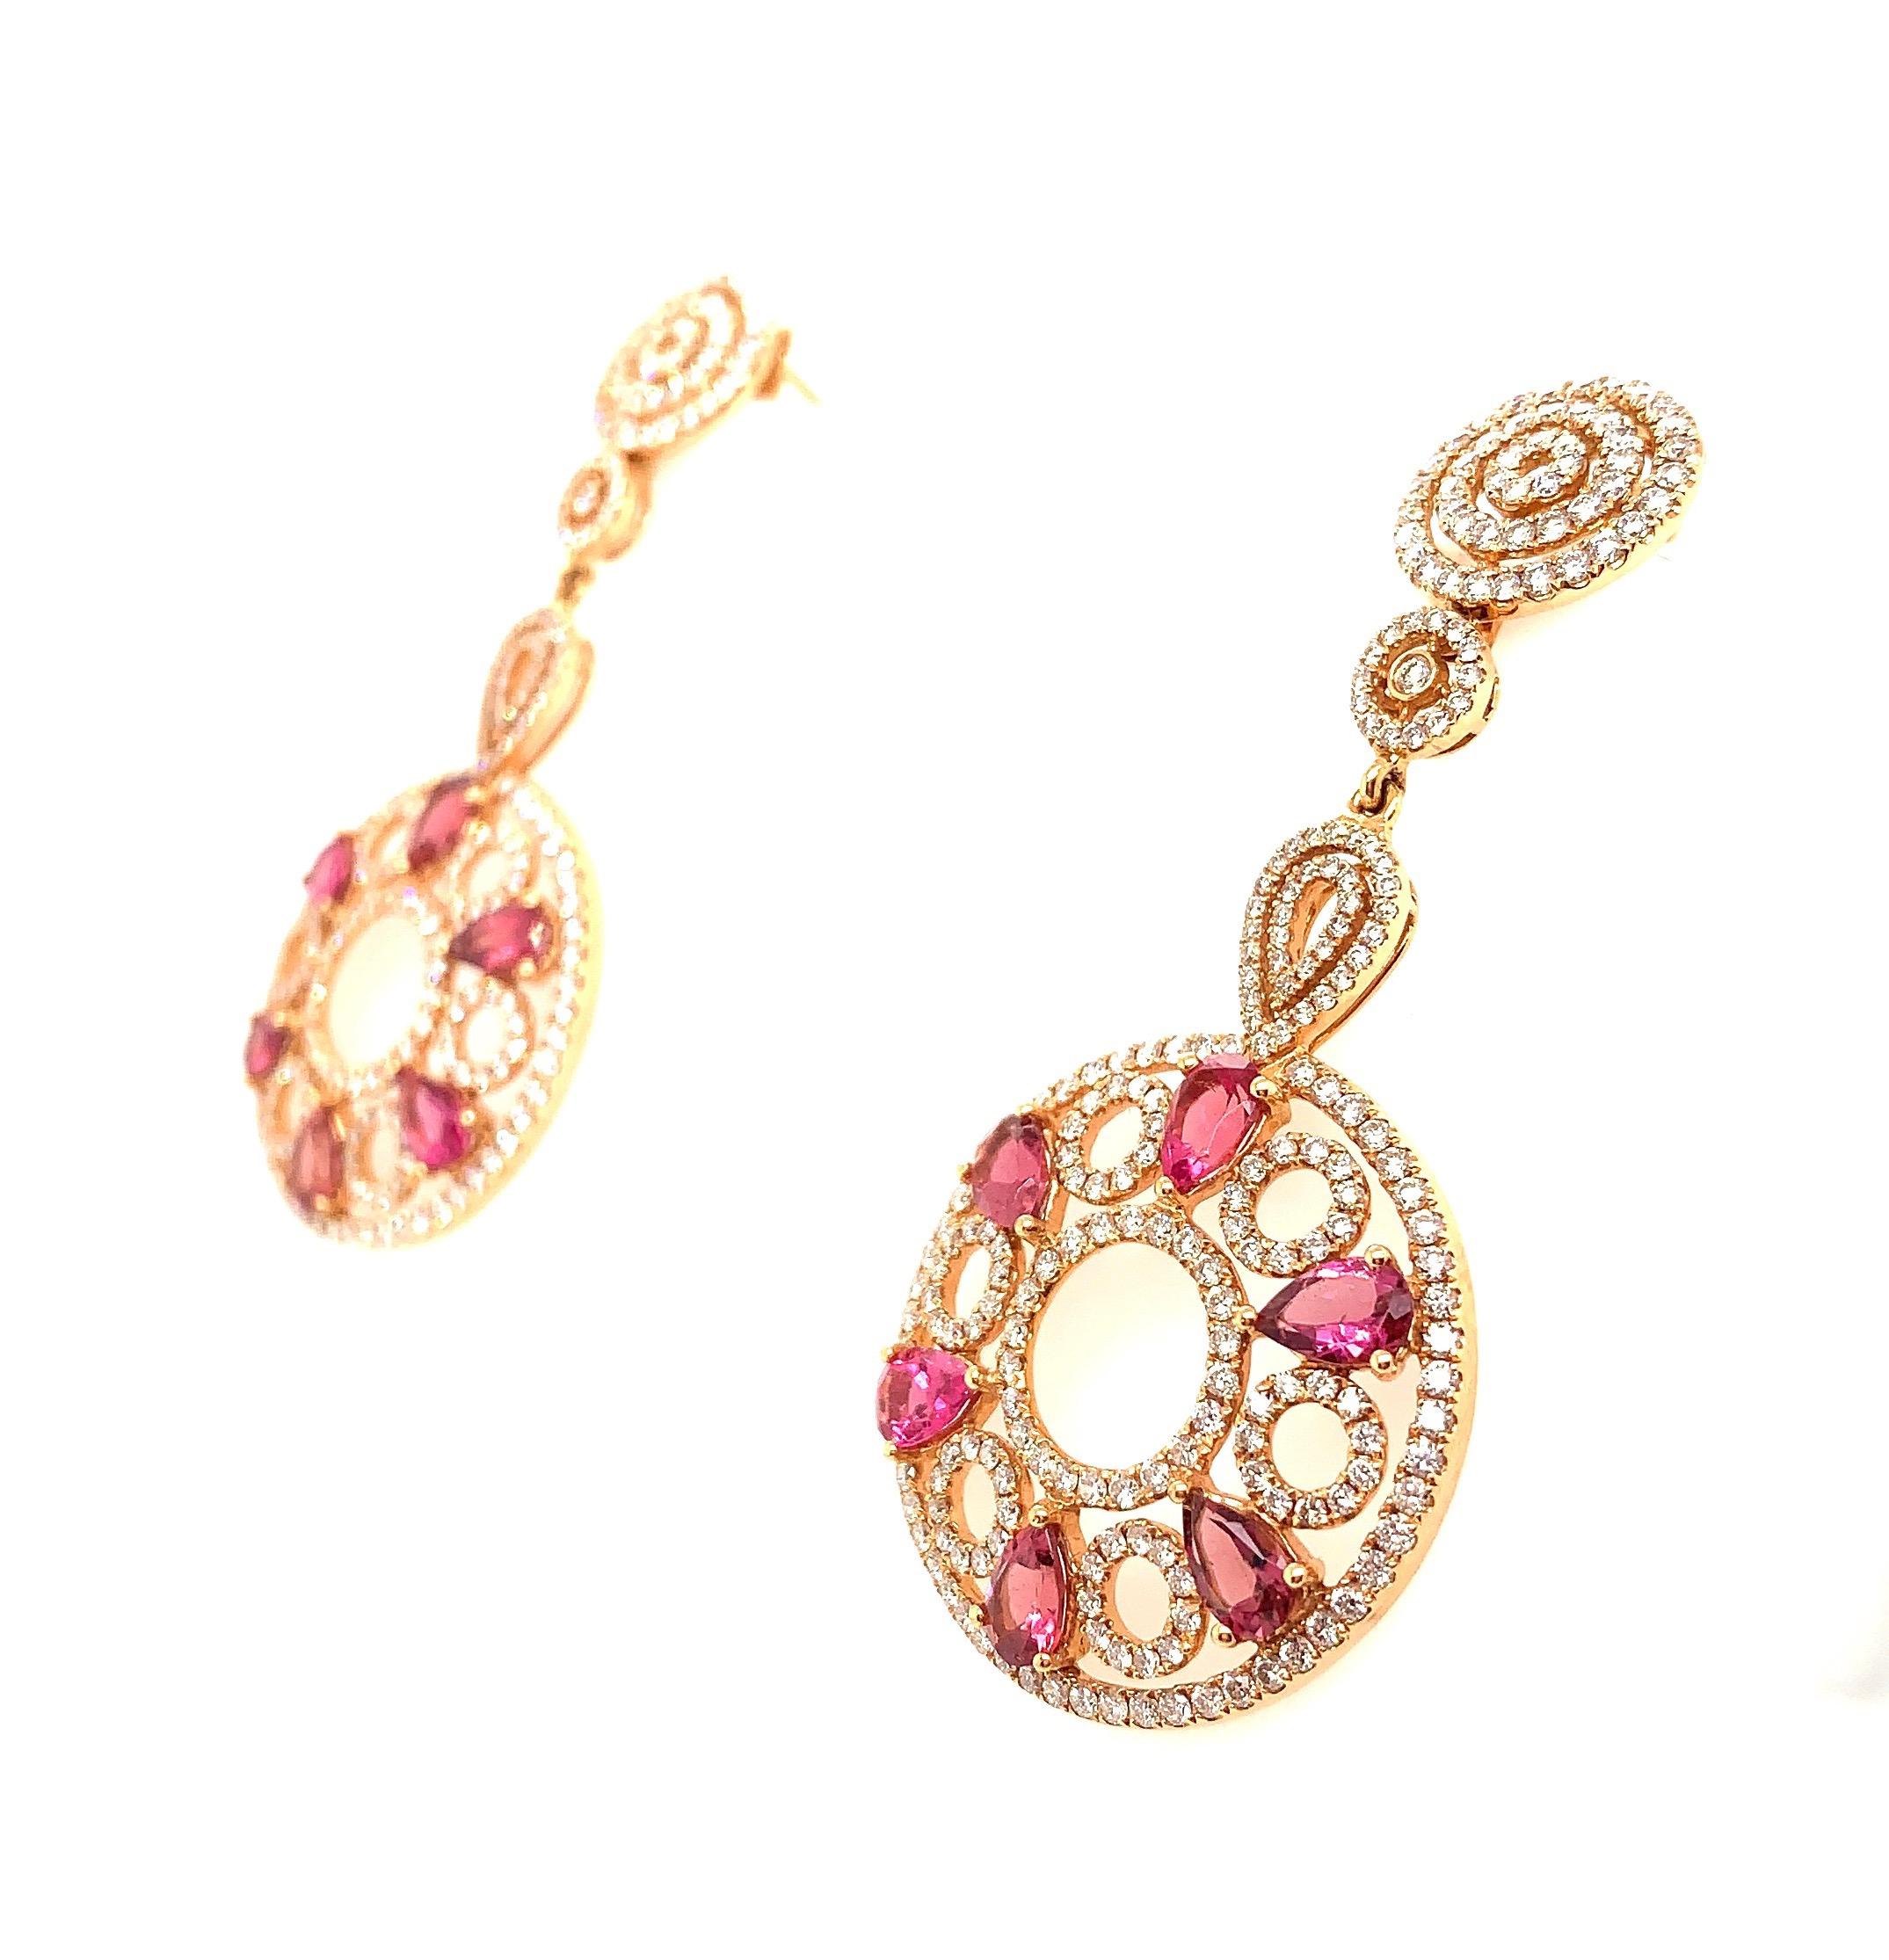 This pair of earring , with total 4.41 ct, 12 pieces pear shape pink tourmaline and 4.19 ct white diamond. Design in rose gold. Suitable for party wear or dining. 

Details information
484 pcs, white diamond 4.19ct
12 pcs, pink tourmaline